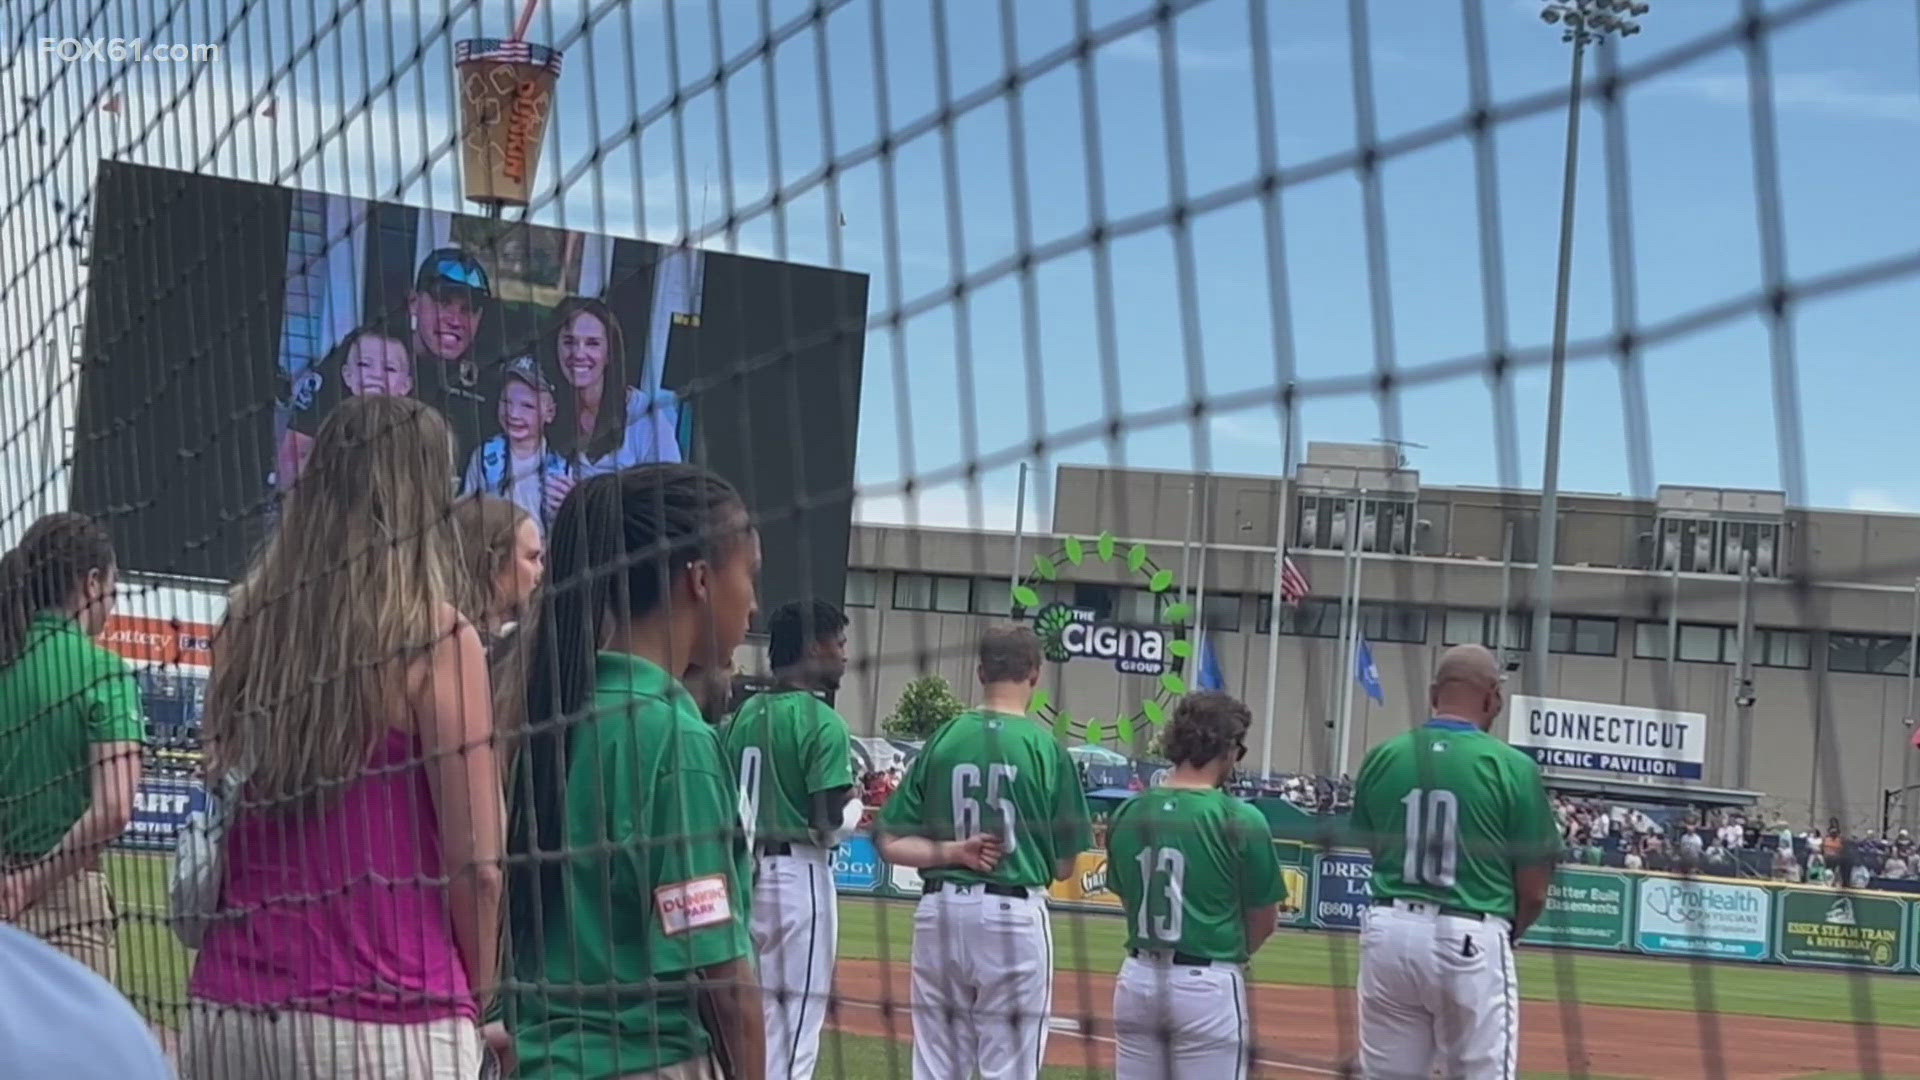 Support ranged from a 4-year-old holding a lemonade stand in Cromwell to benefit the trooper's family to a moment of silence at a Hartford Yard Goats game Sunday.